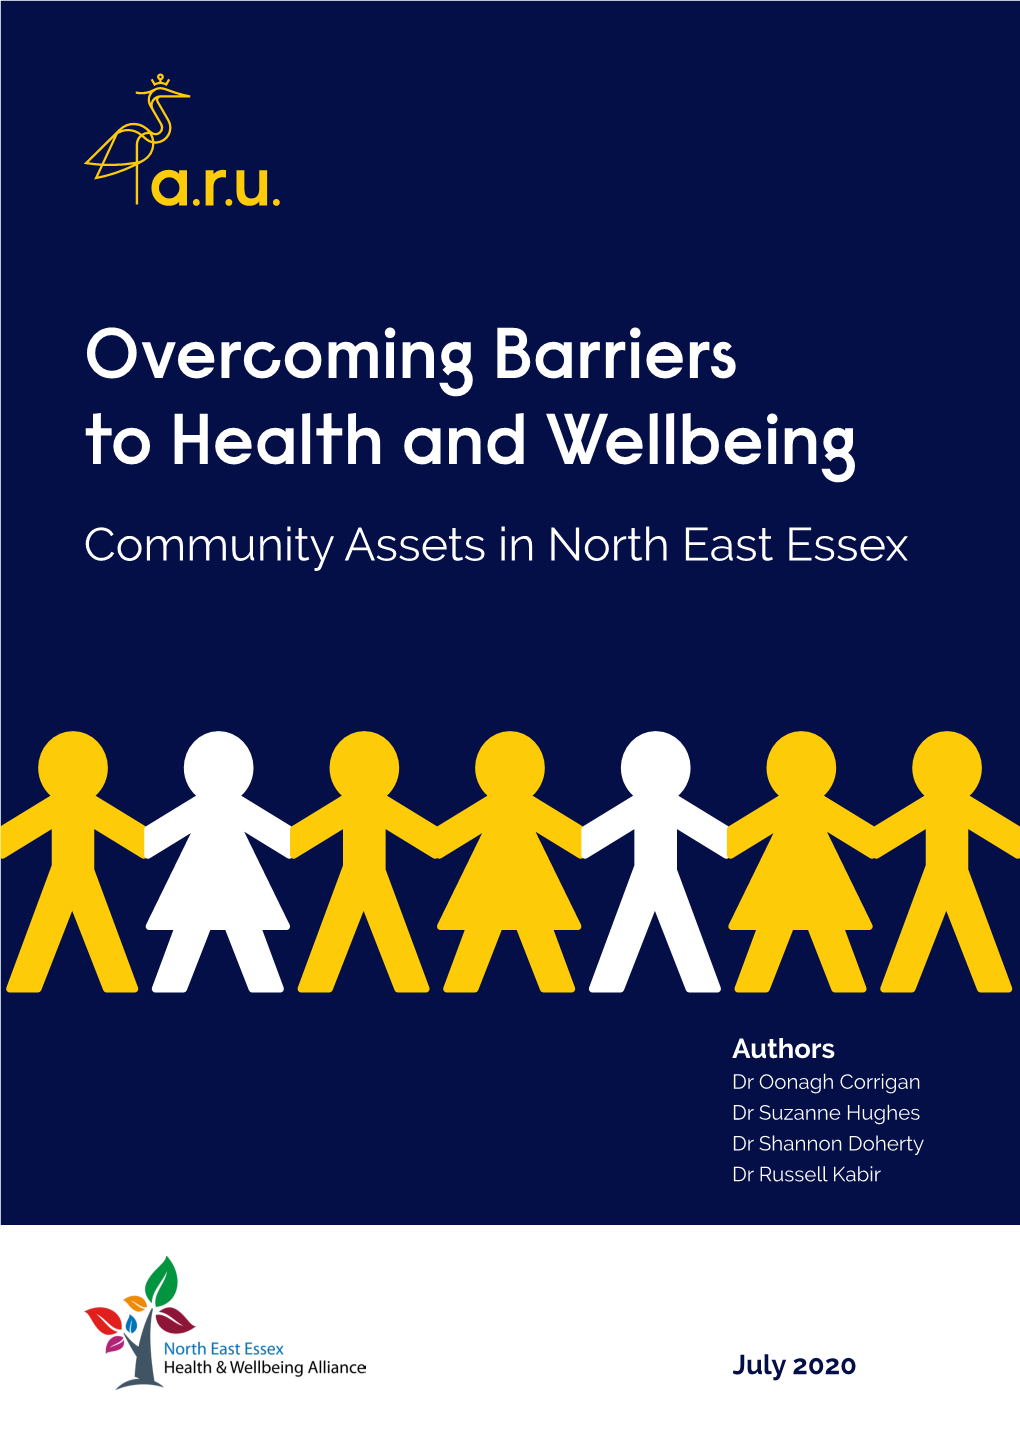 Overcoming Barriers to Health and Wellbeing Community Assets in North East Essex